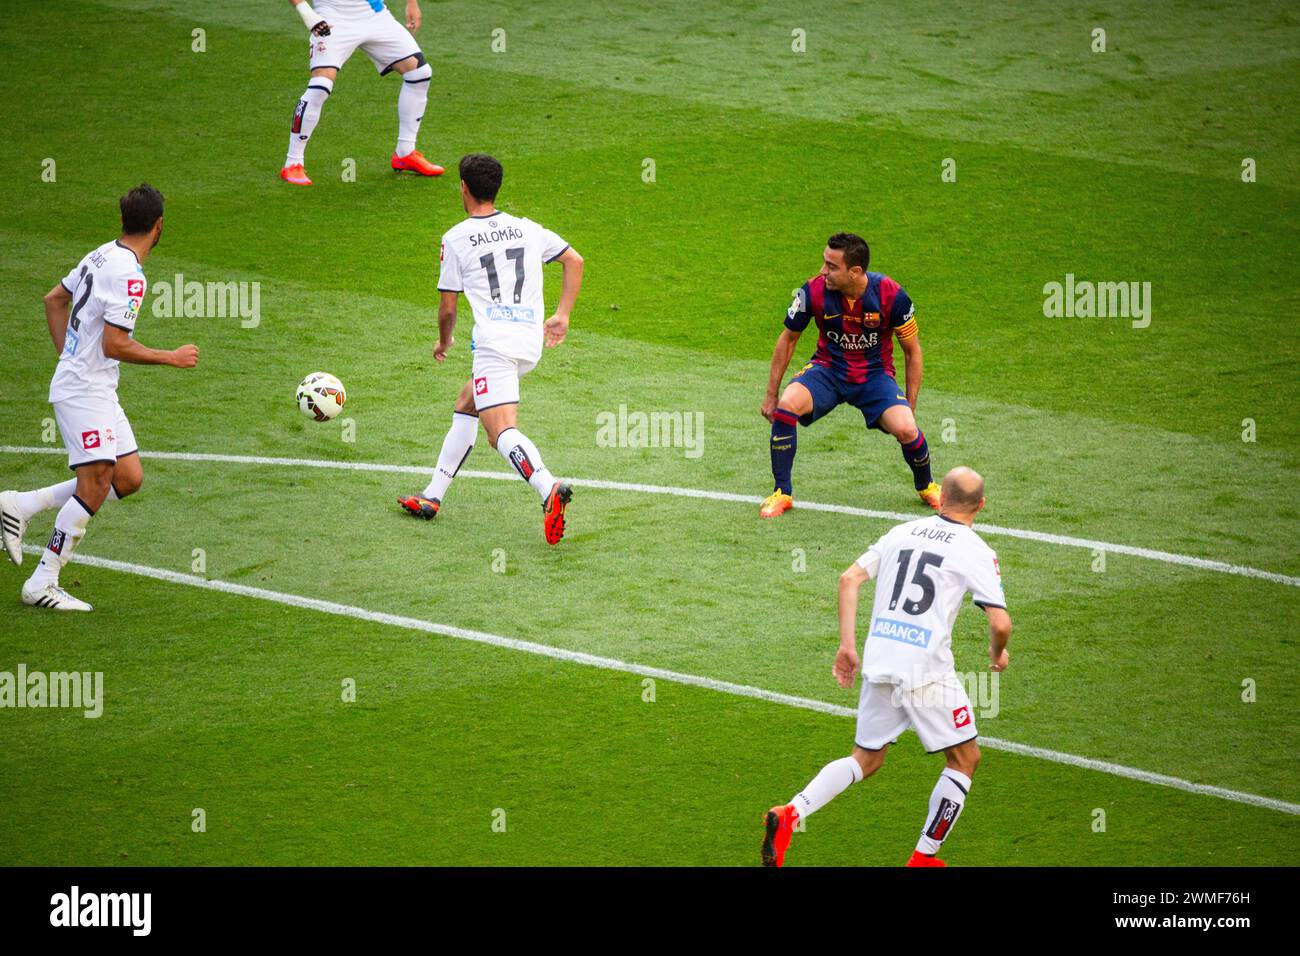 XAVI, FAREWELL GAME, BARCELONA FC, 2015: Xavi Hernandez of Barcelona is dispossed at the edge of the box by Diogo Salomão. The final game of the La Liga 2014-15 season in Spain between Barcelona FC and Deportivo de La Coruna at Camp Nou, Barcelona on May 23 2015. The Game finished 2-2. Barcelona celebrated winning the championship title and legend Xavi's final home game. Deportiva got the point they needed to avoid relegation. Photograph: Rob Watkins Stock Photo